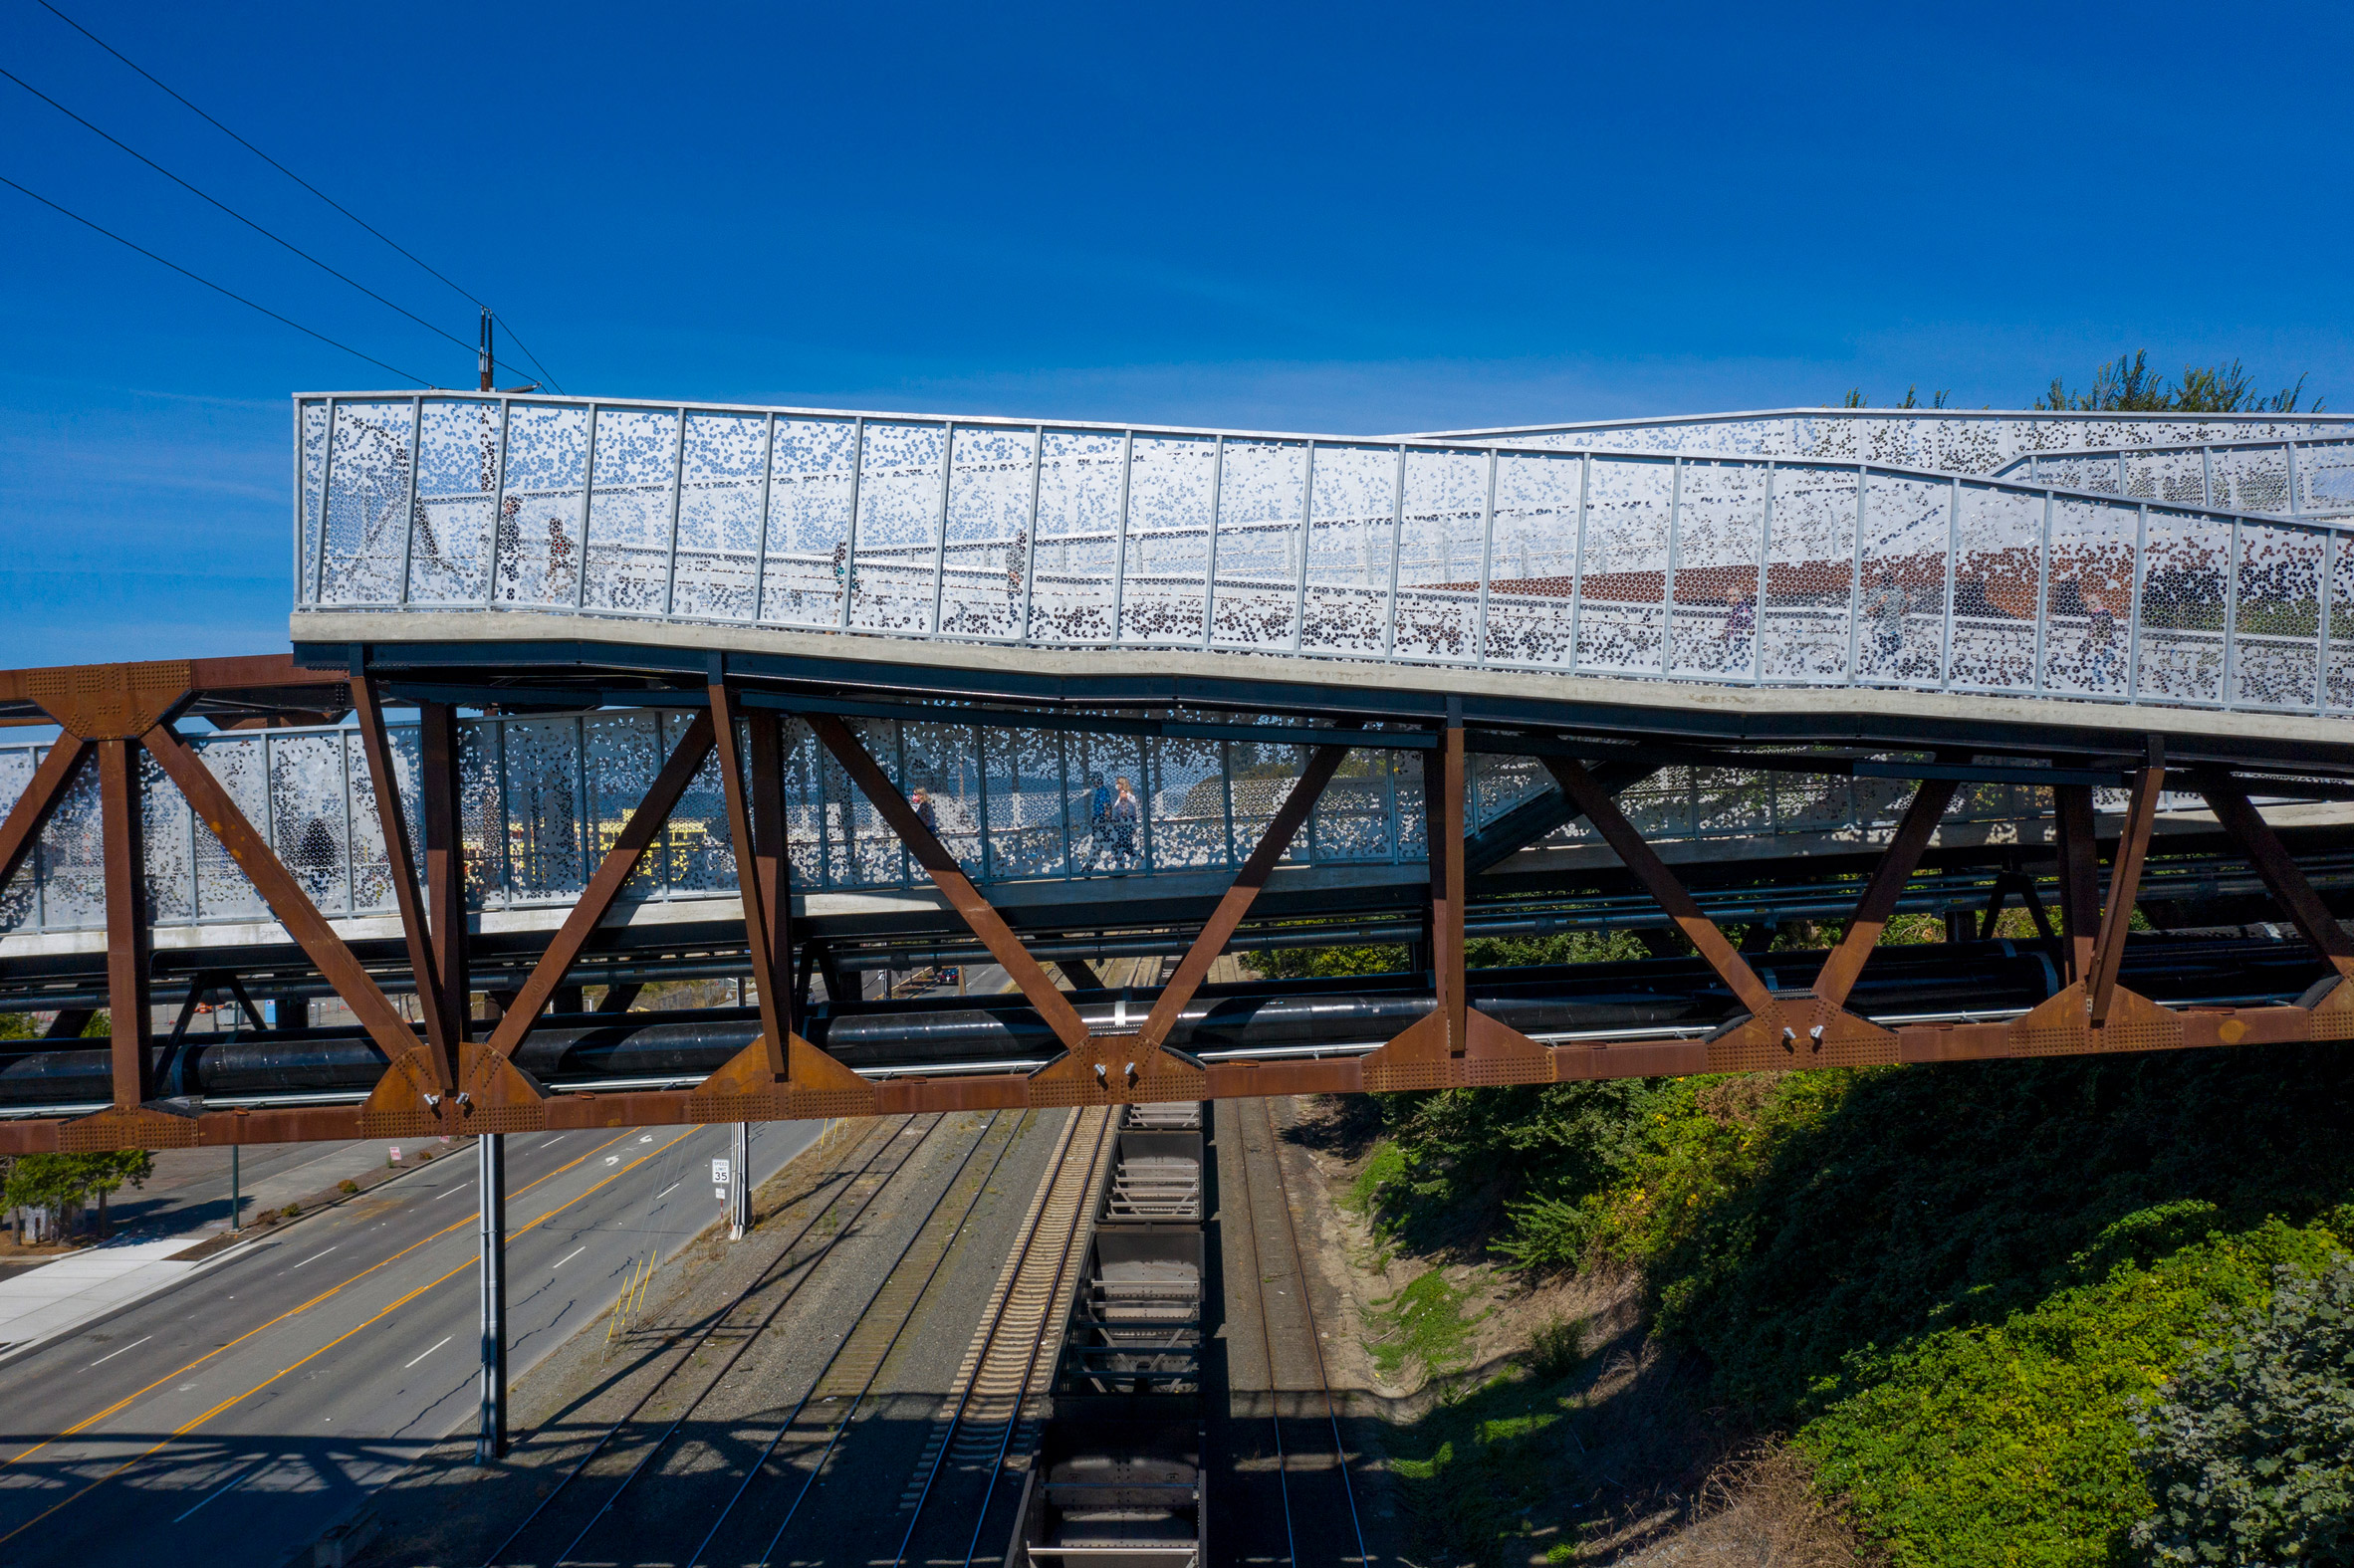 Weathering steel trusses and perforated steel guardrails of a bridge